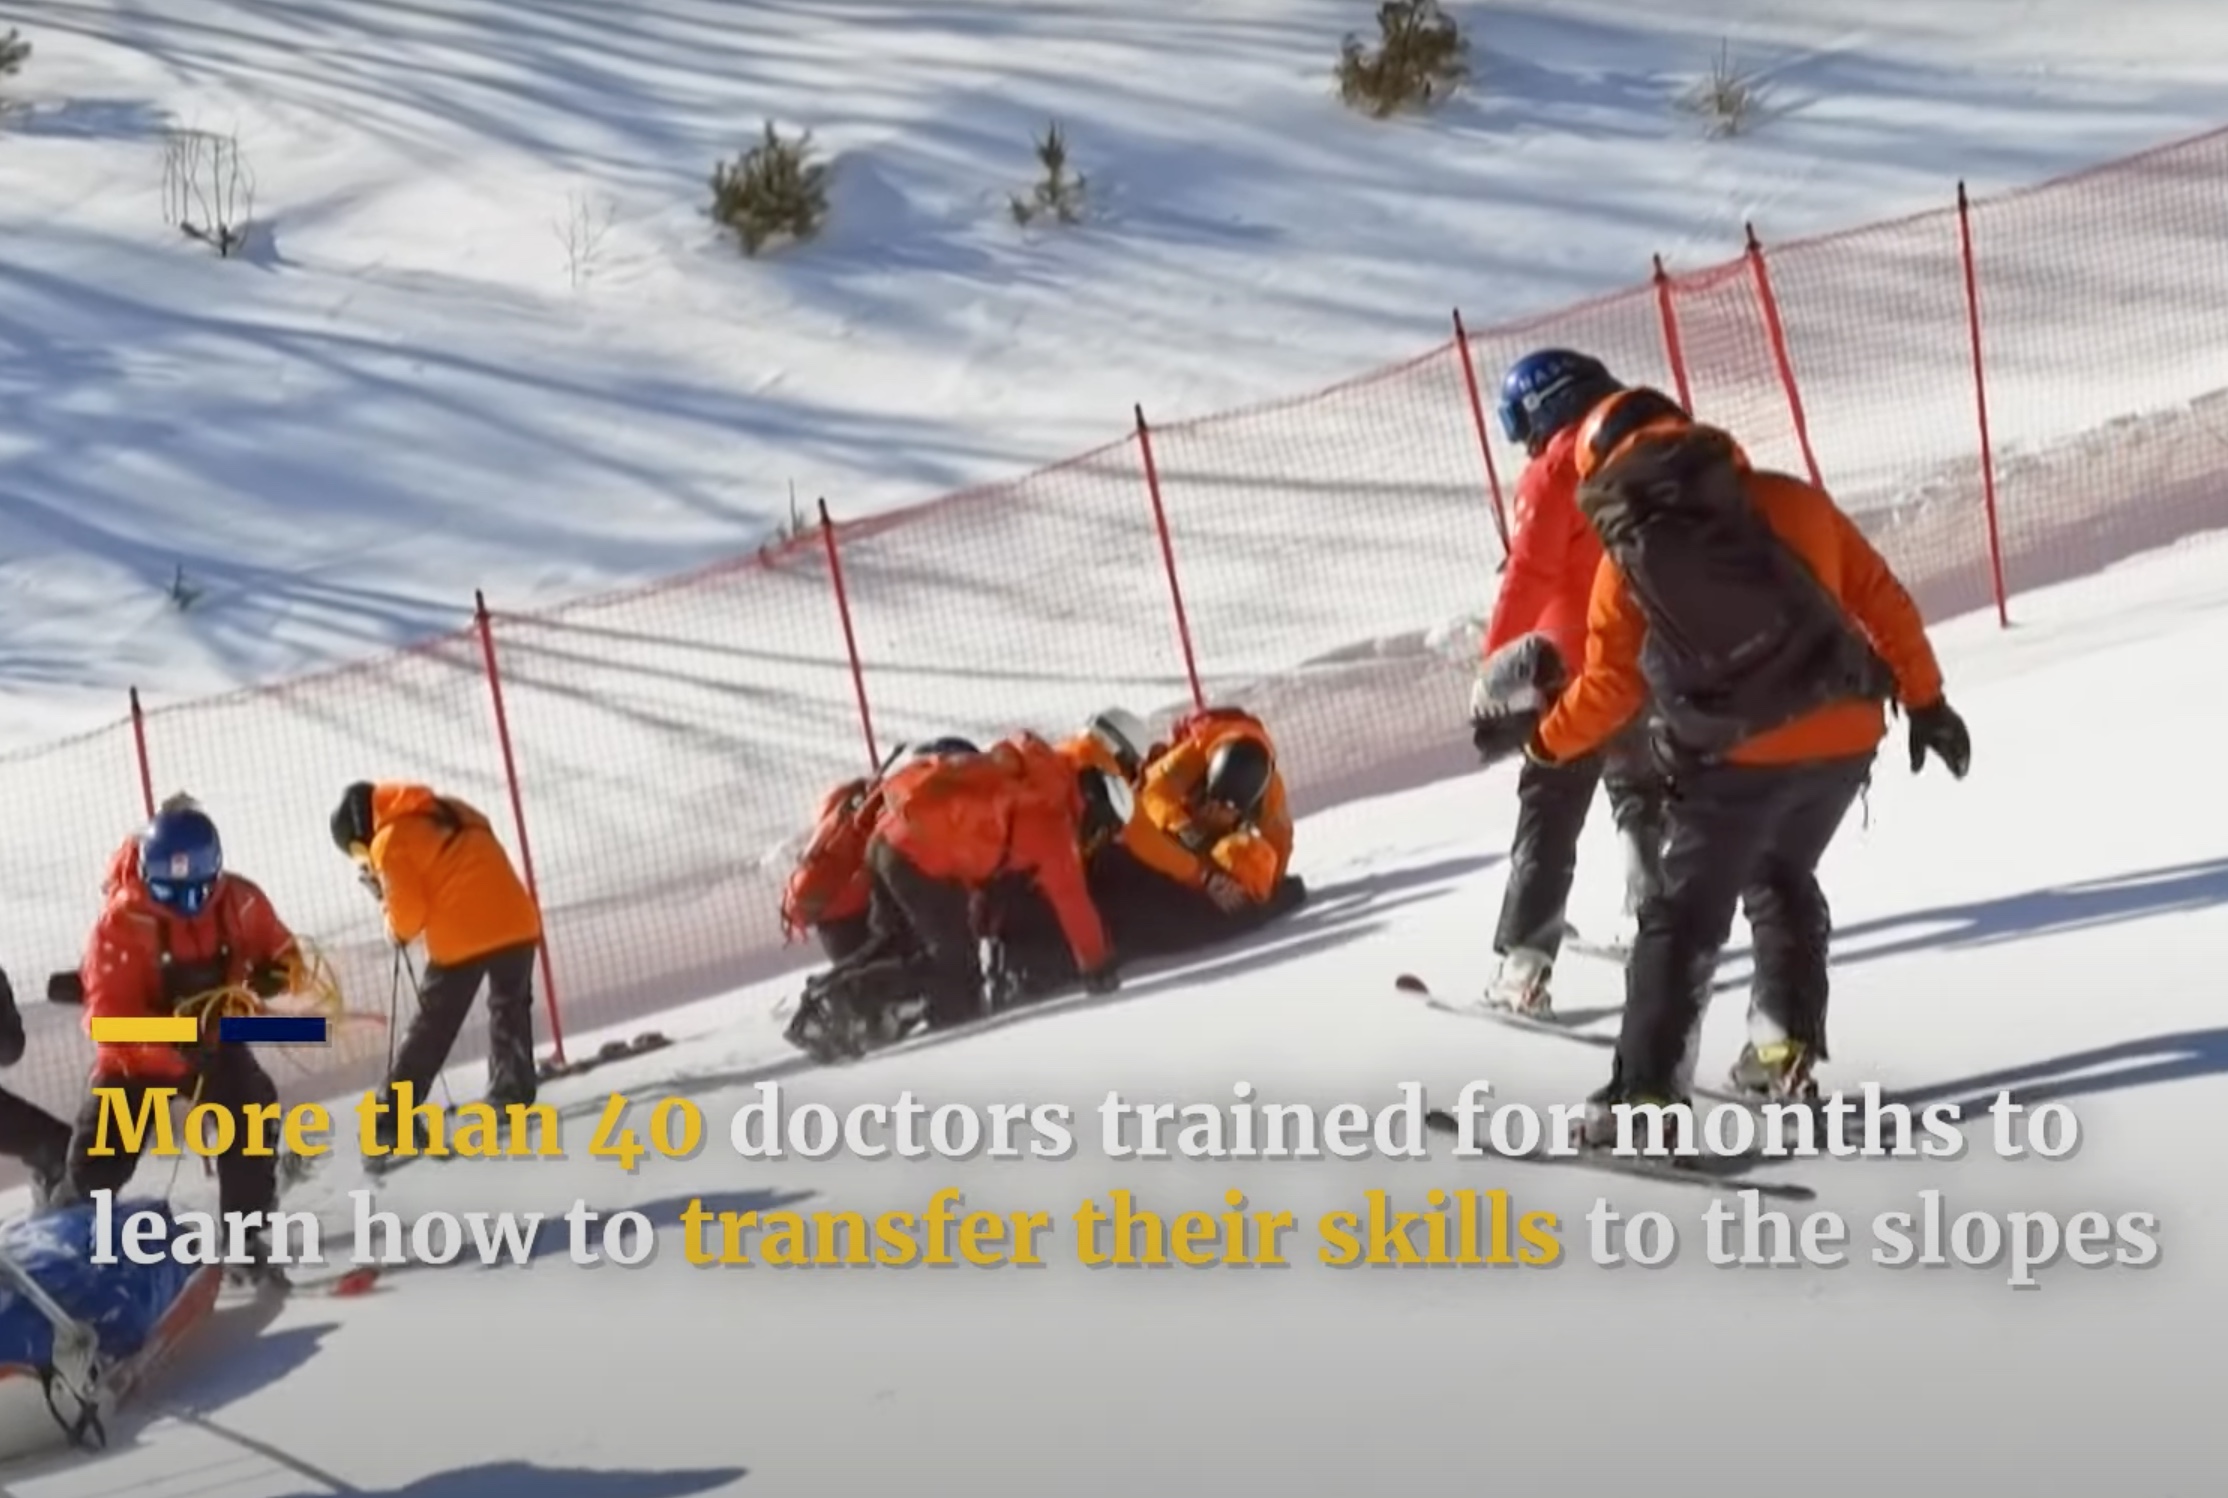 40+ Chinese Doctors Trained In Skiing For Emergency Response During Olympics